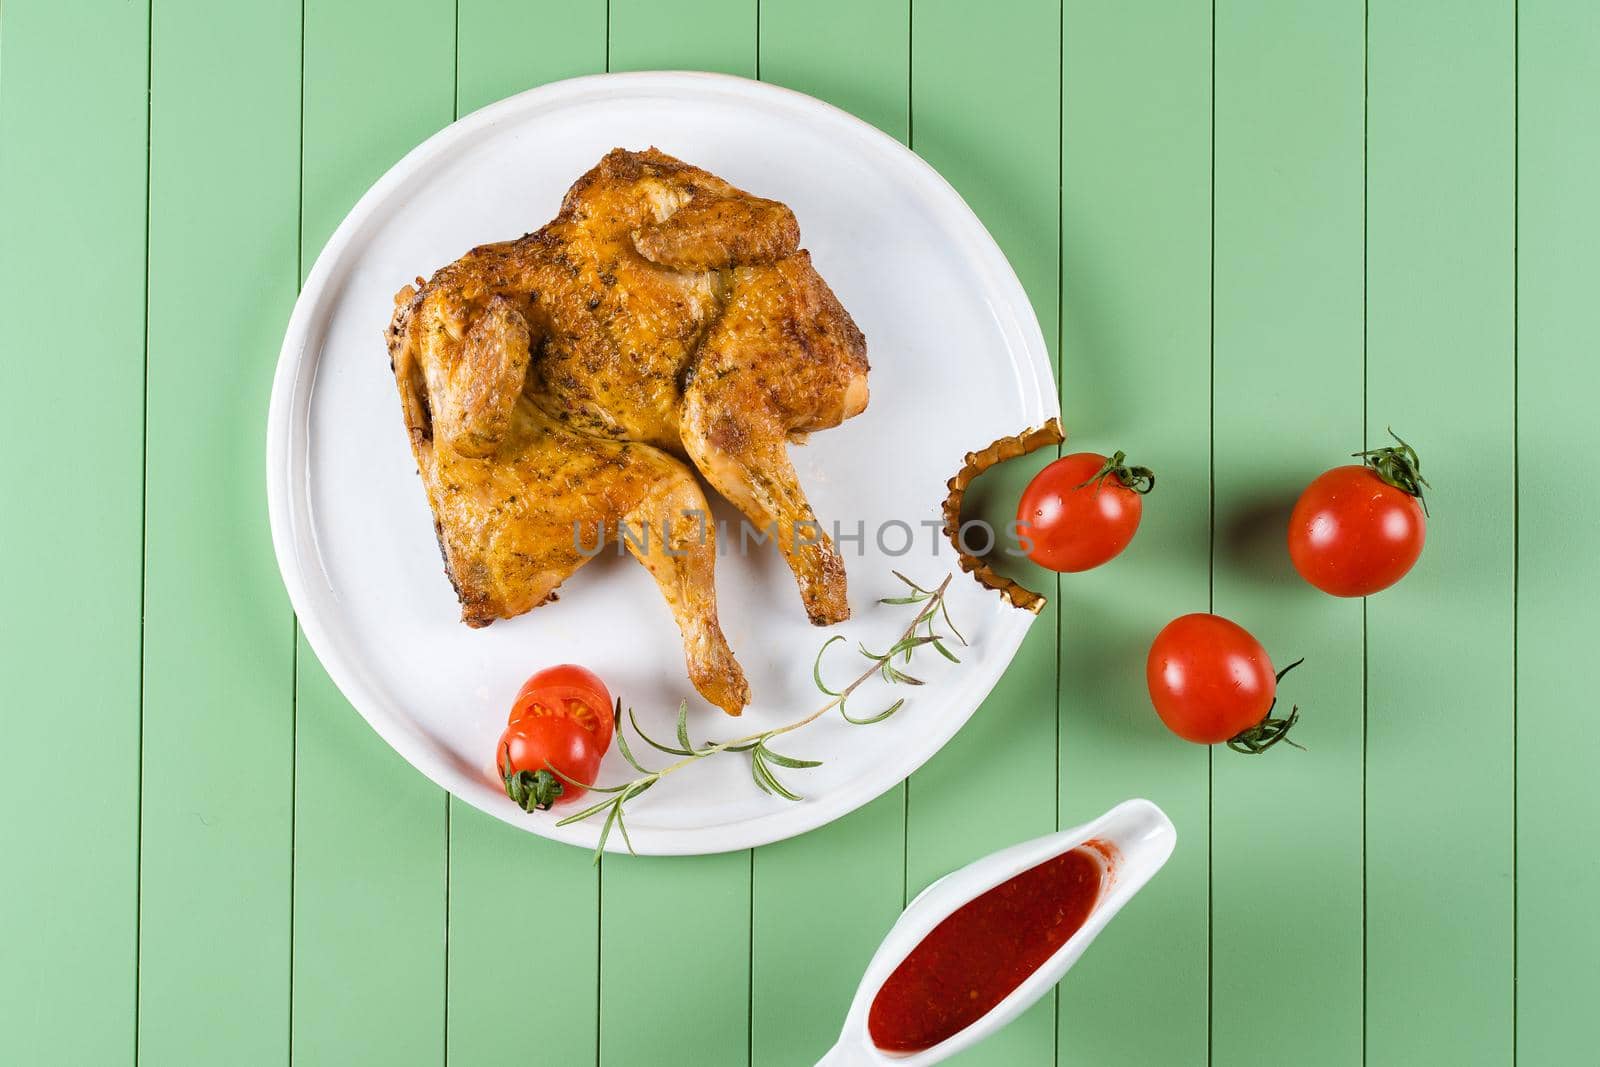 Chicken tobacco with tomato sauce, rosemary and tomatoes on a beautiful white plate on a green background. Grilled chicken.